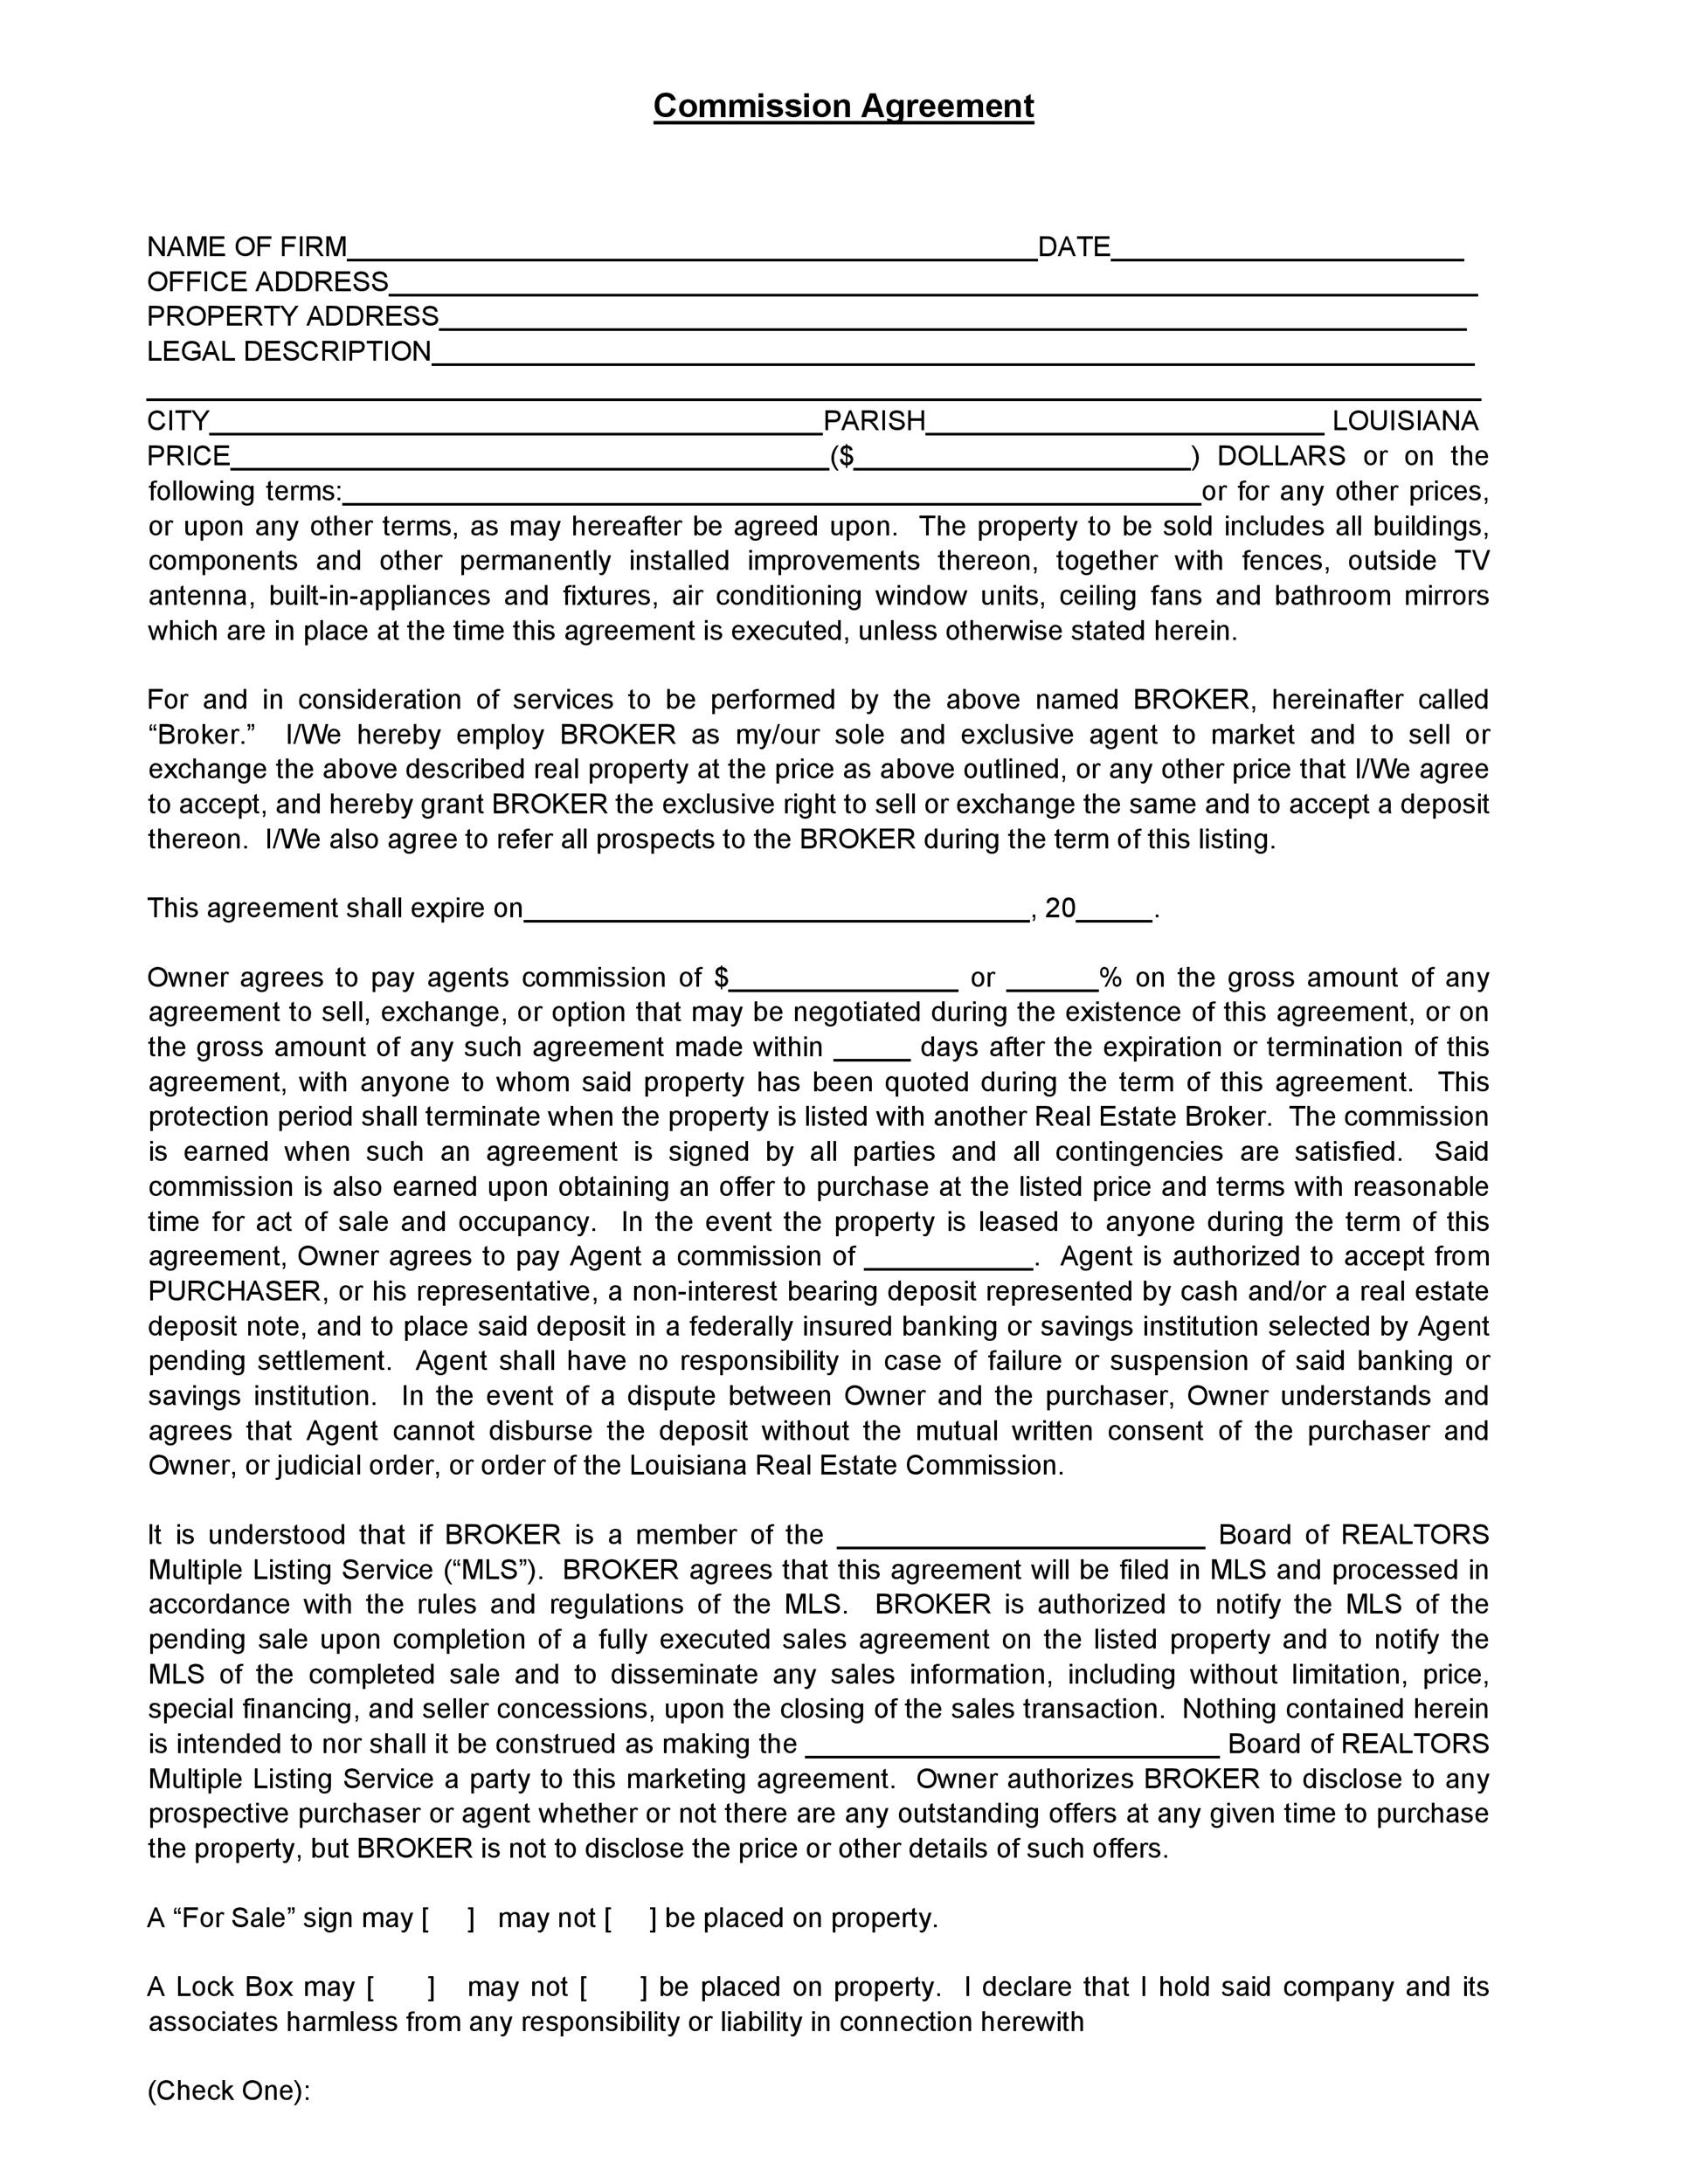 Free Commission Agreement Template 19